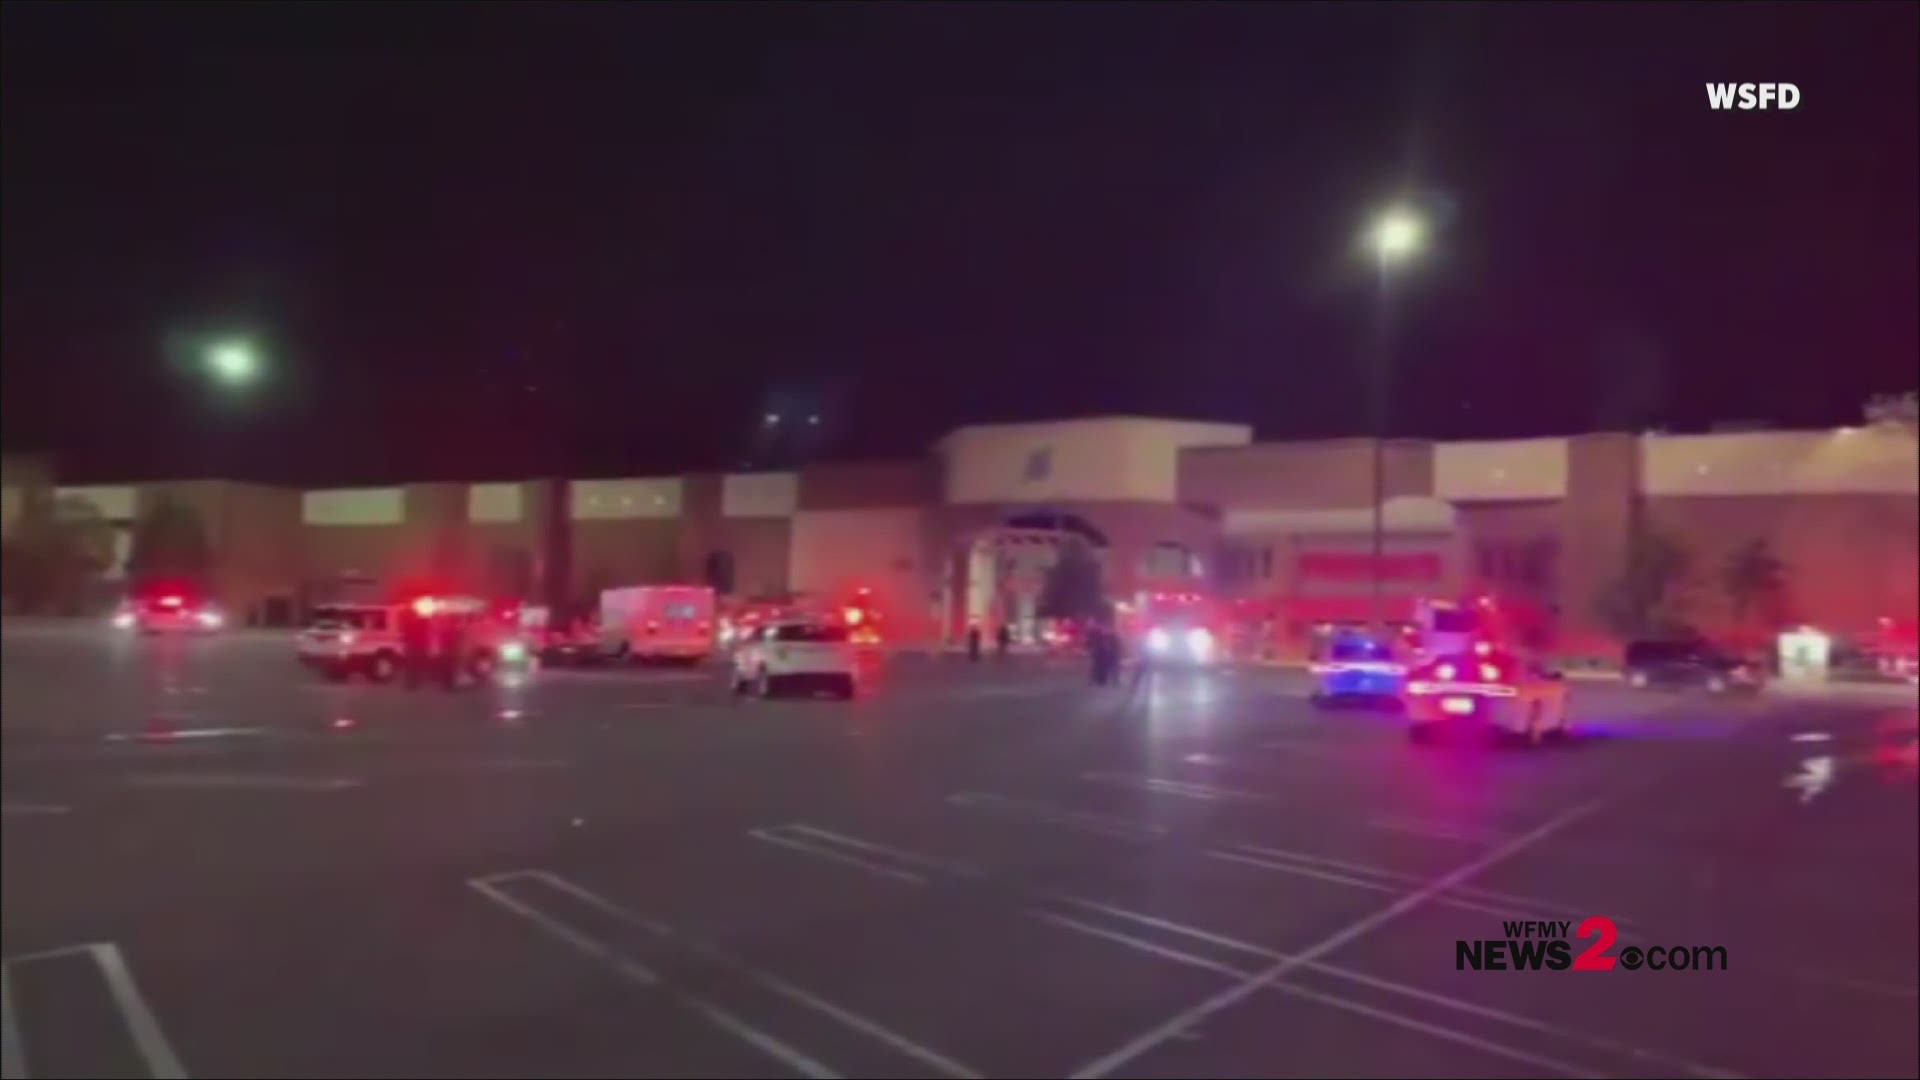 A fire that sent flames through the roof at TGI Fridays in Winston-Salem is under investigation. The two-alarm fire was called in around 2:30 a.m. Wednesday.